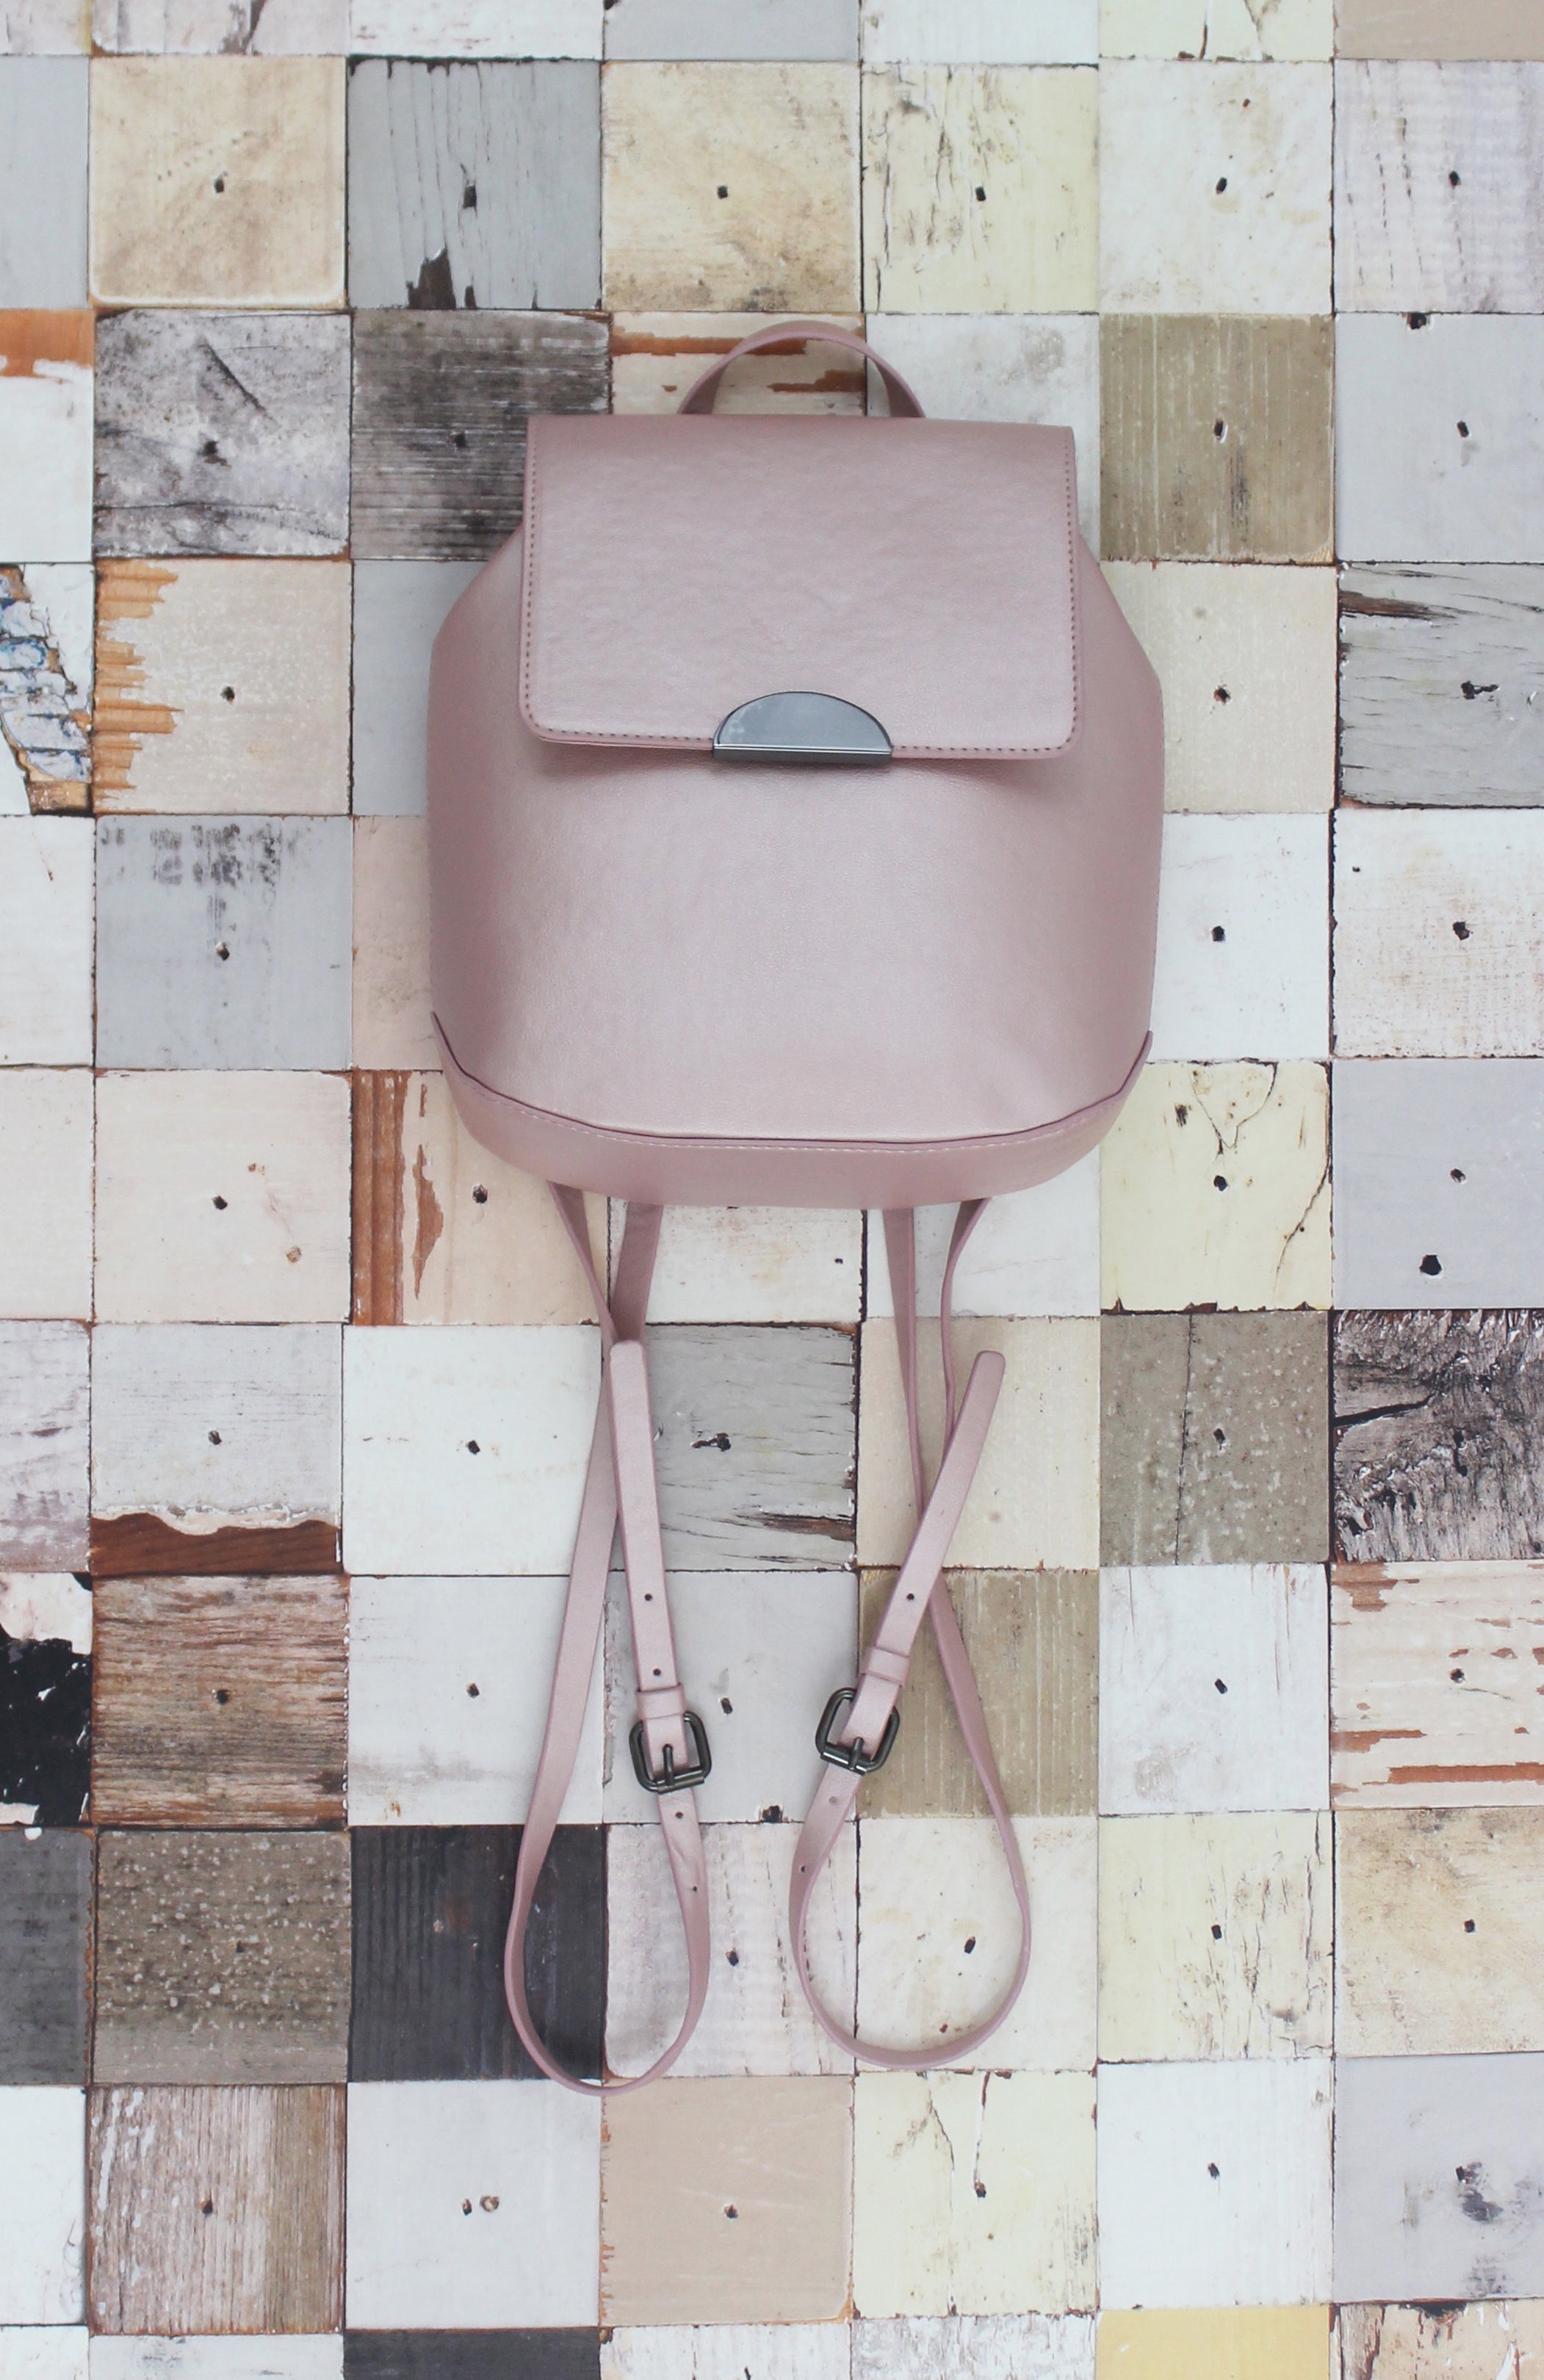 Nora Backpack in Blush